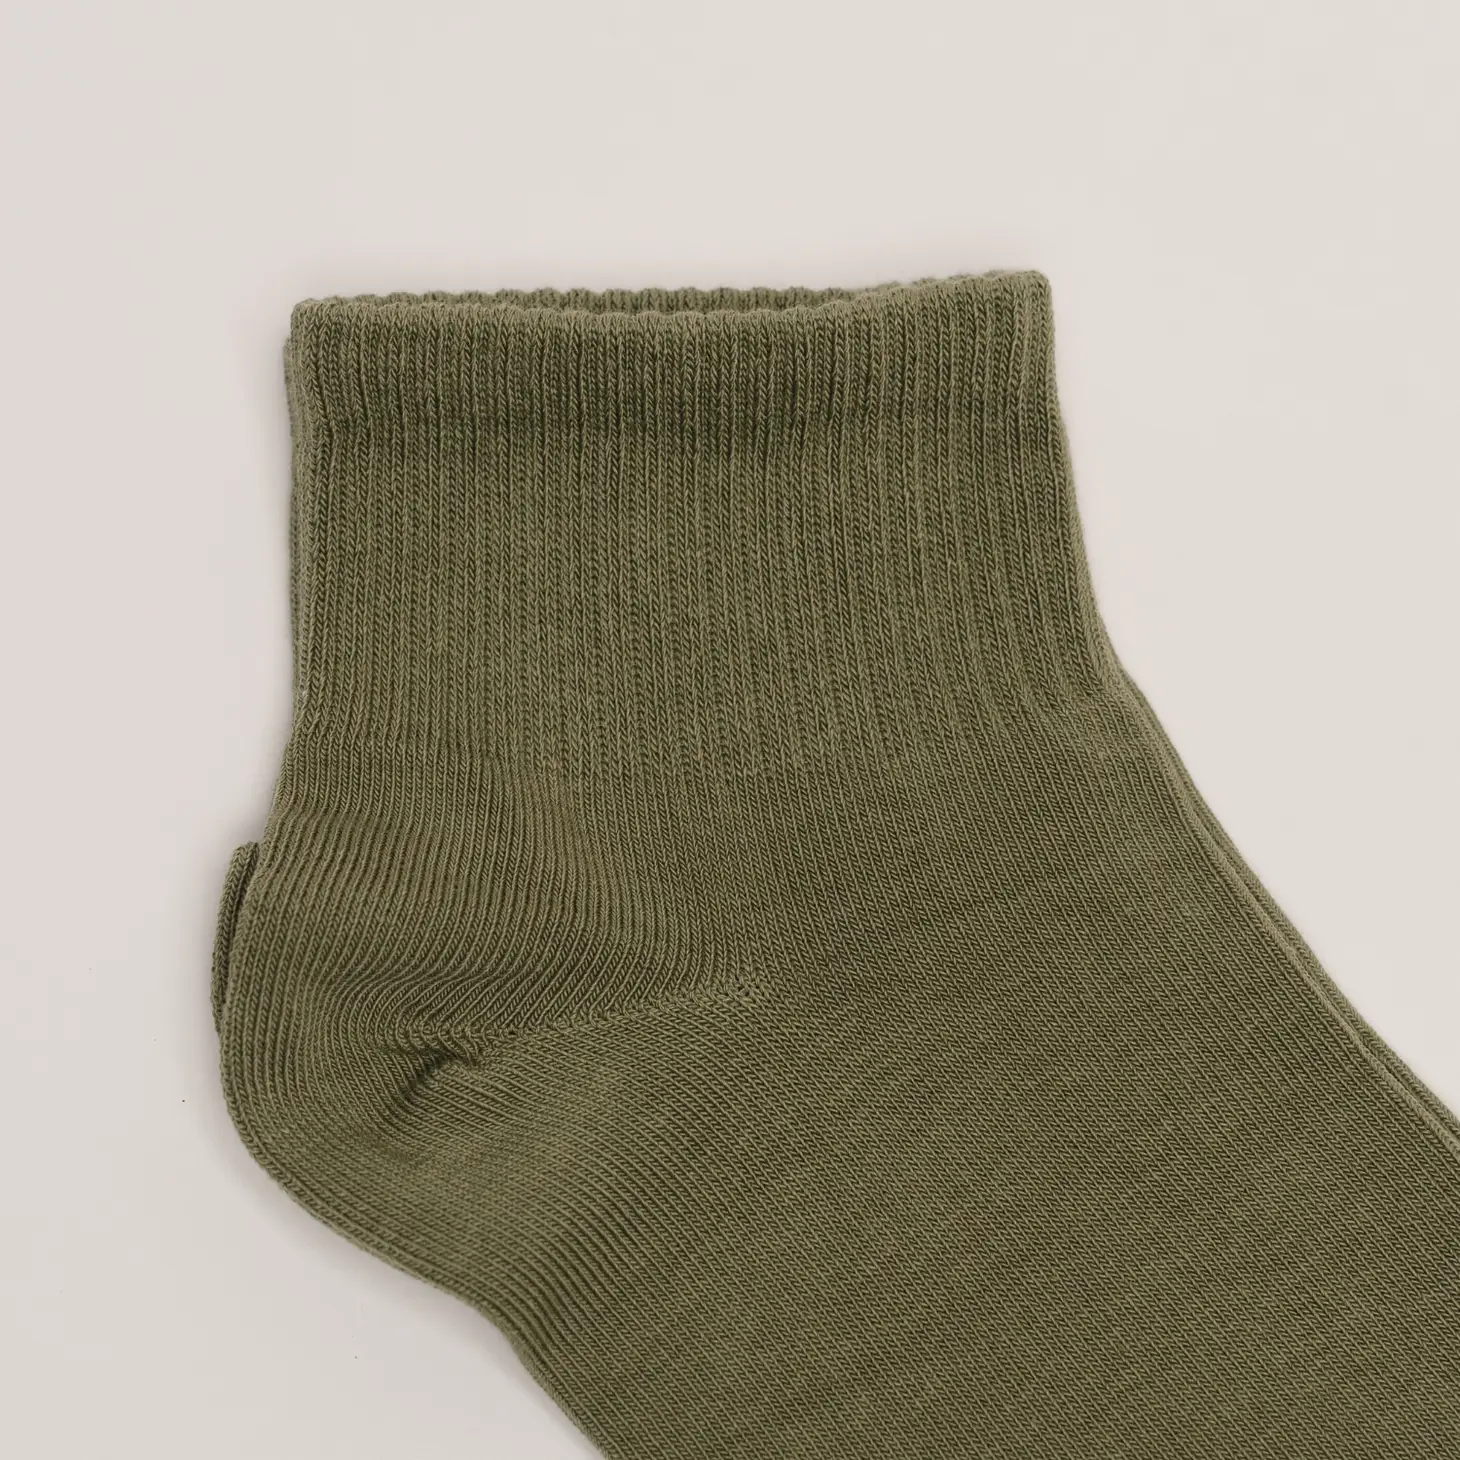 Cotton Ankle Sock